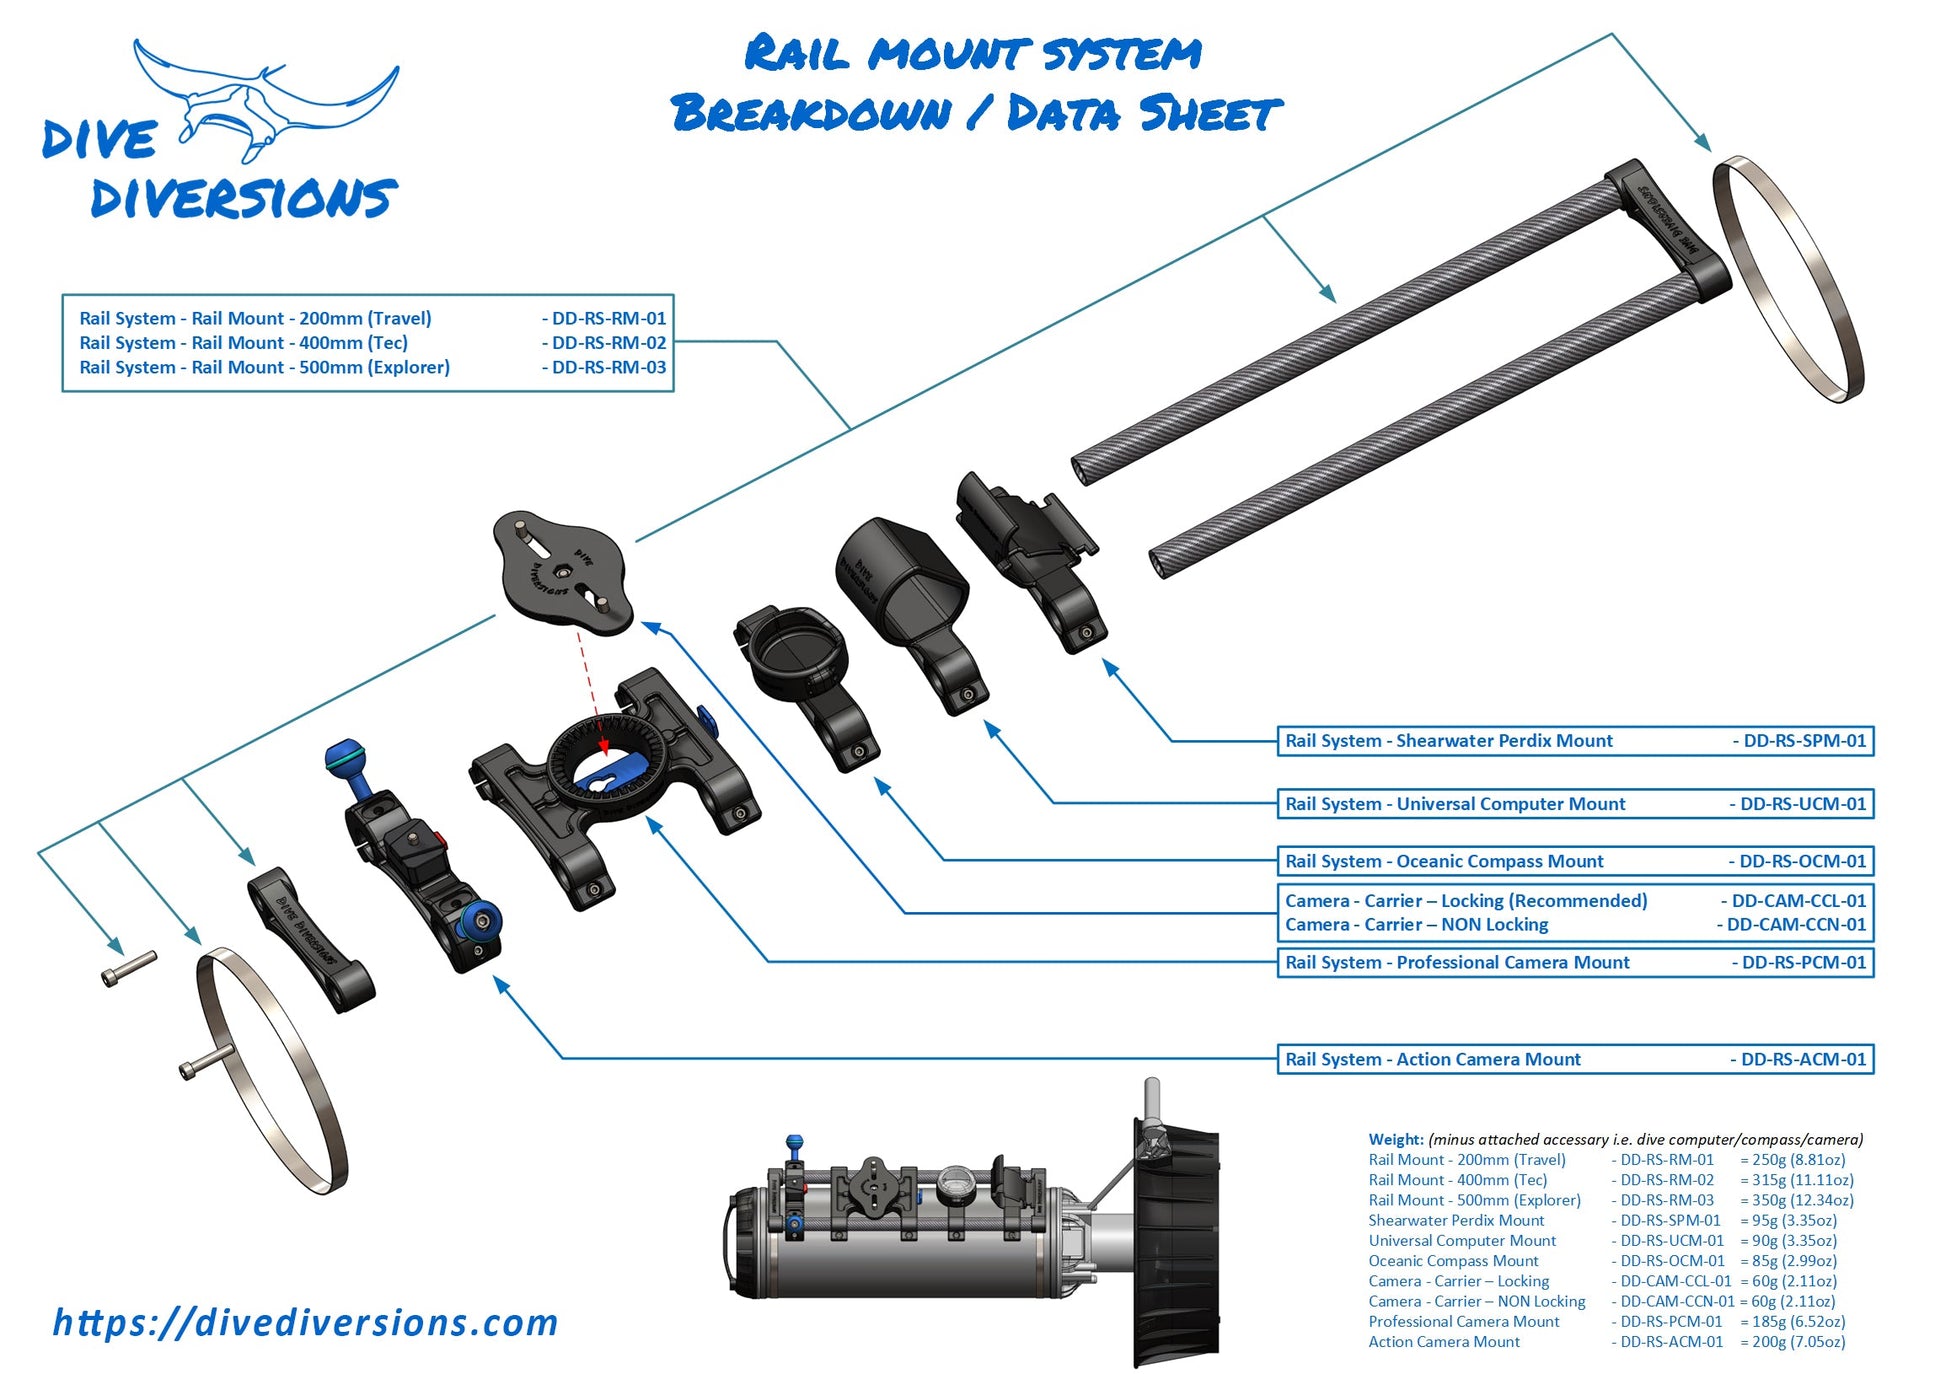 Image showing the complete rail mount system showing all available modules and part numbers.